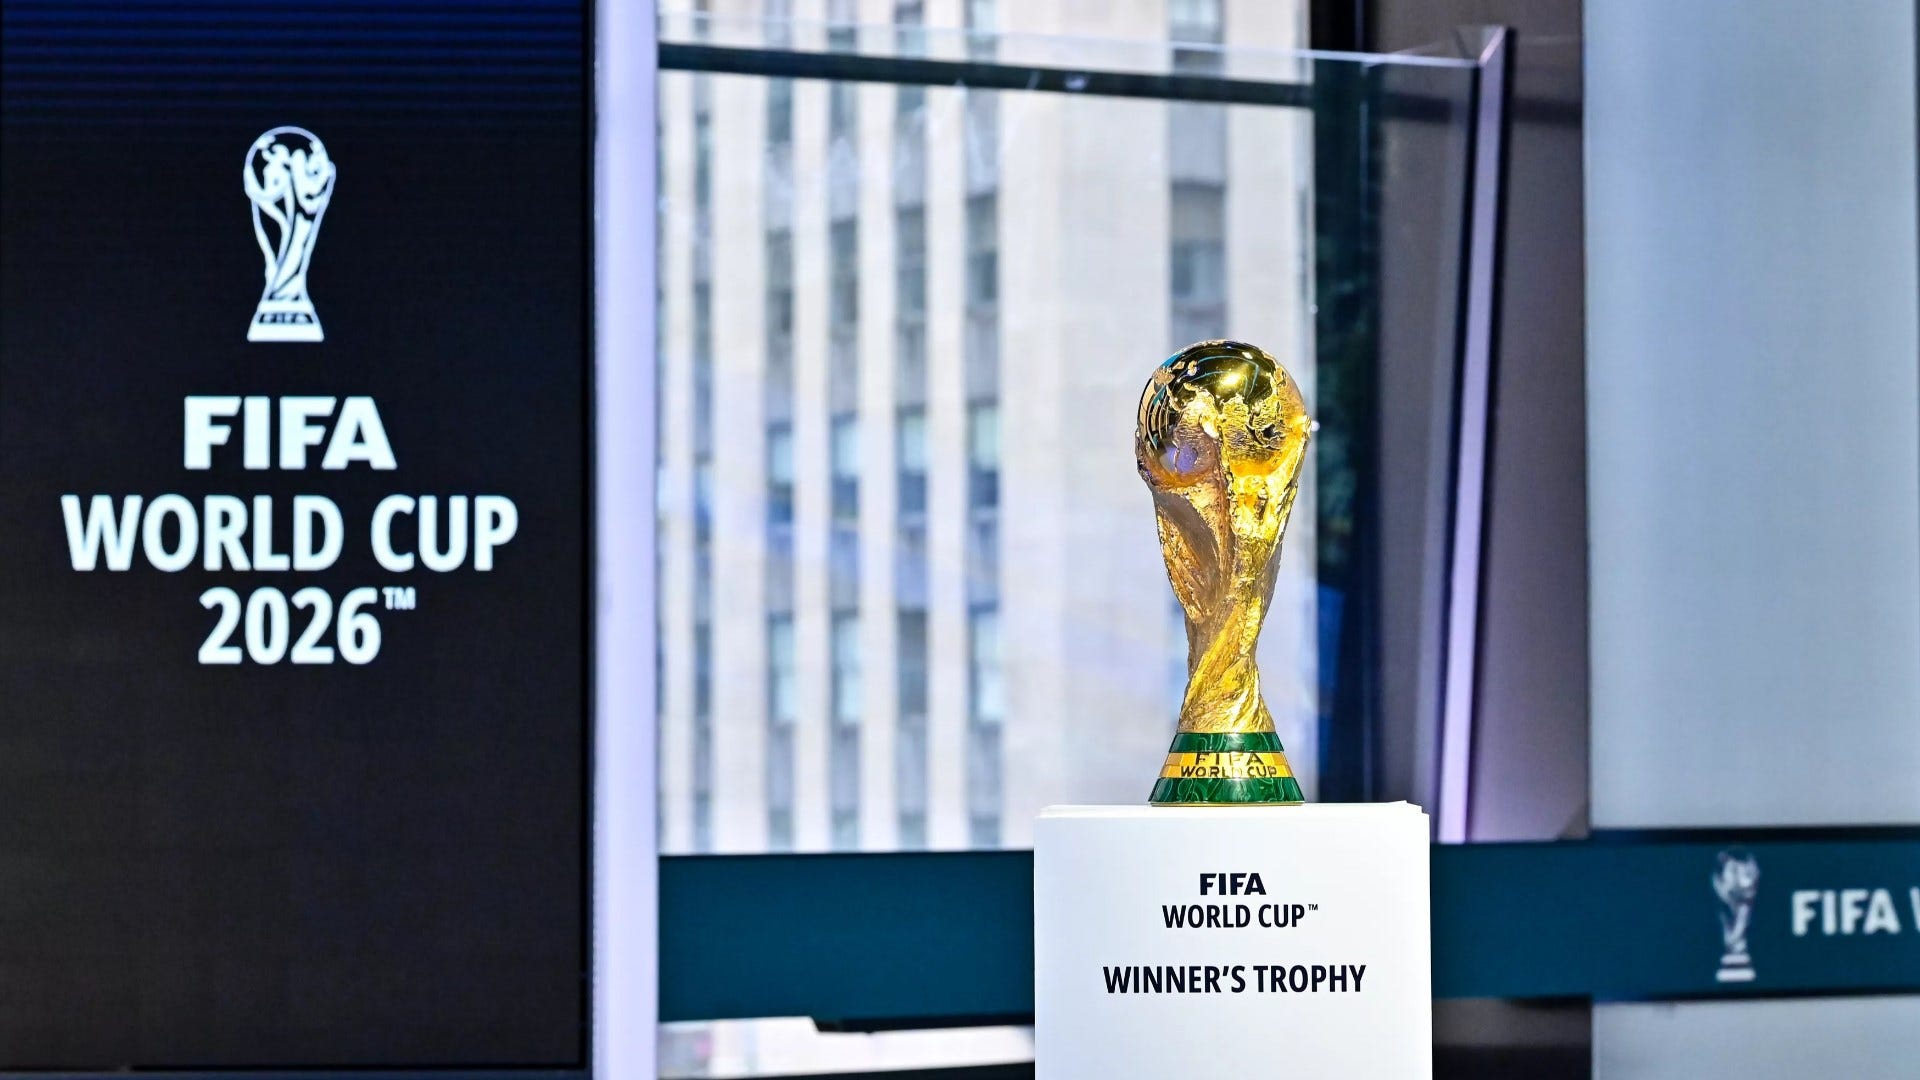 2026 World Cup Asian Qualifiers: Dates, Results, Broadcast Channels, and Group Rankings